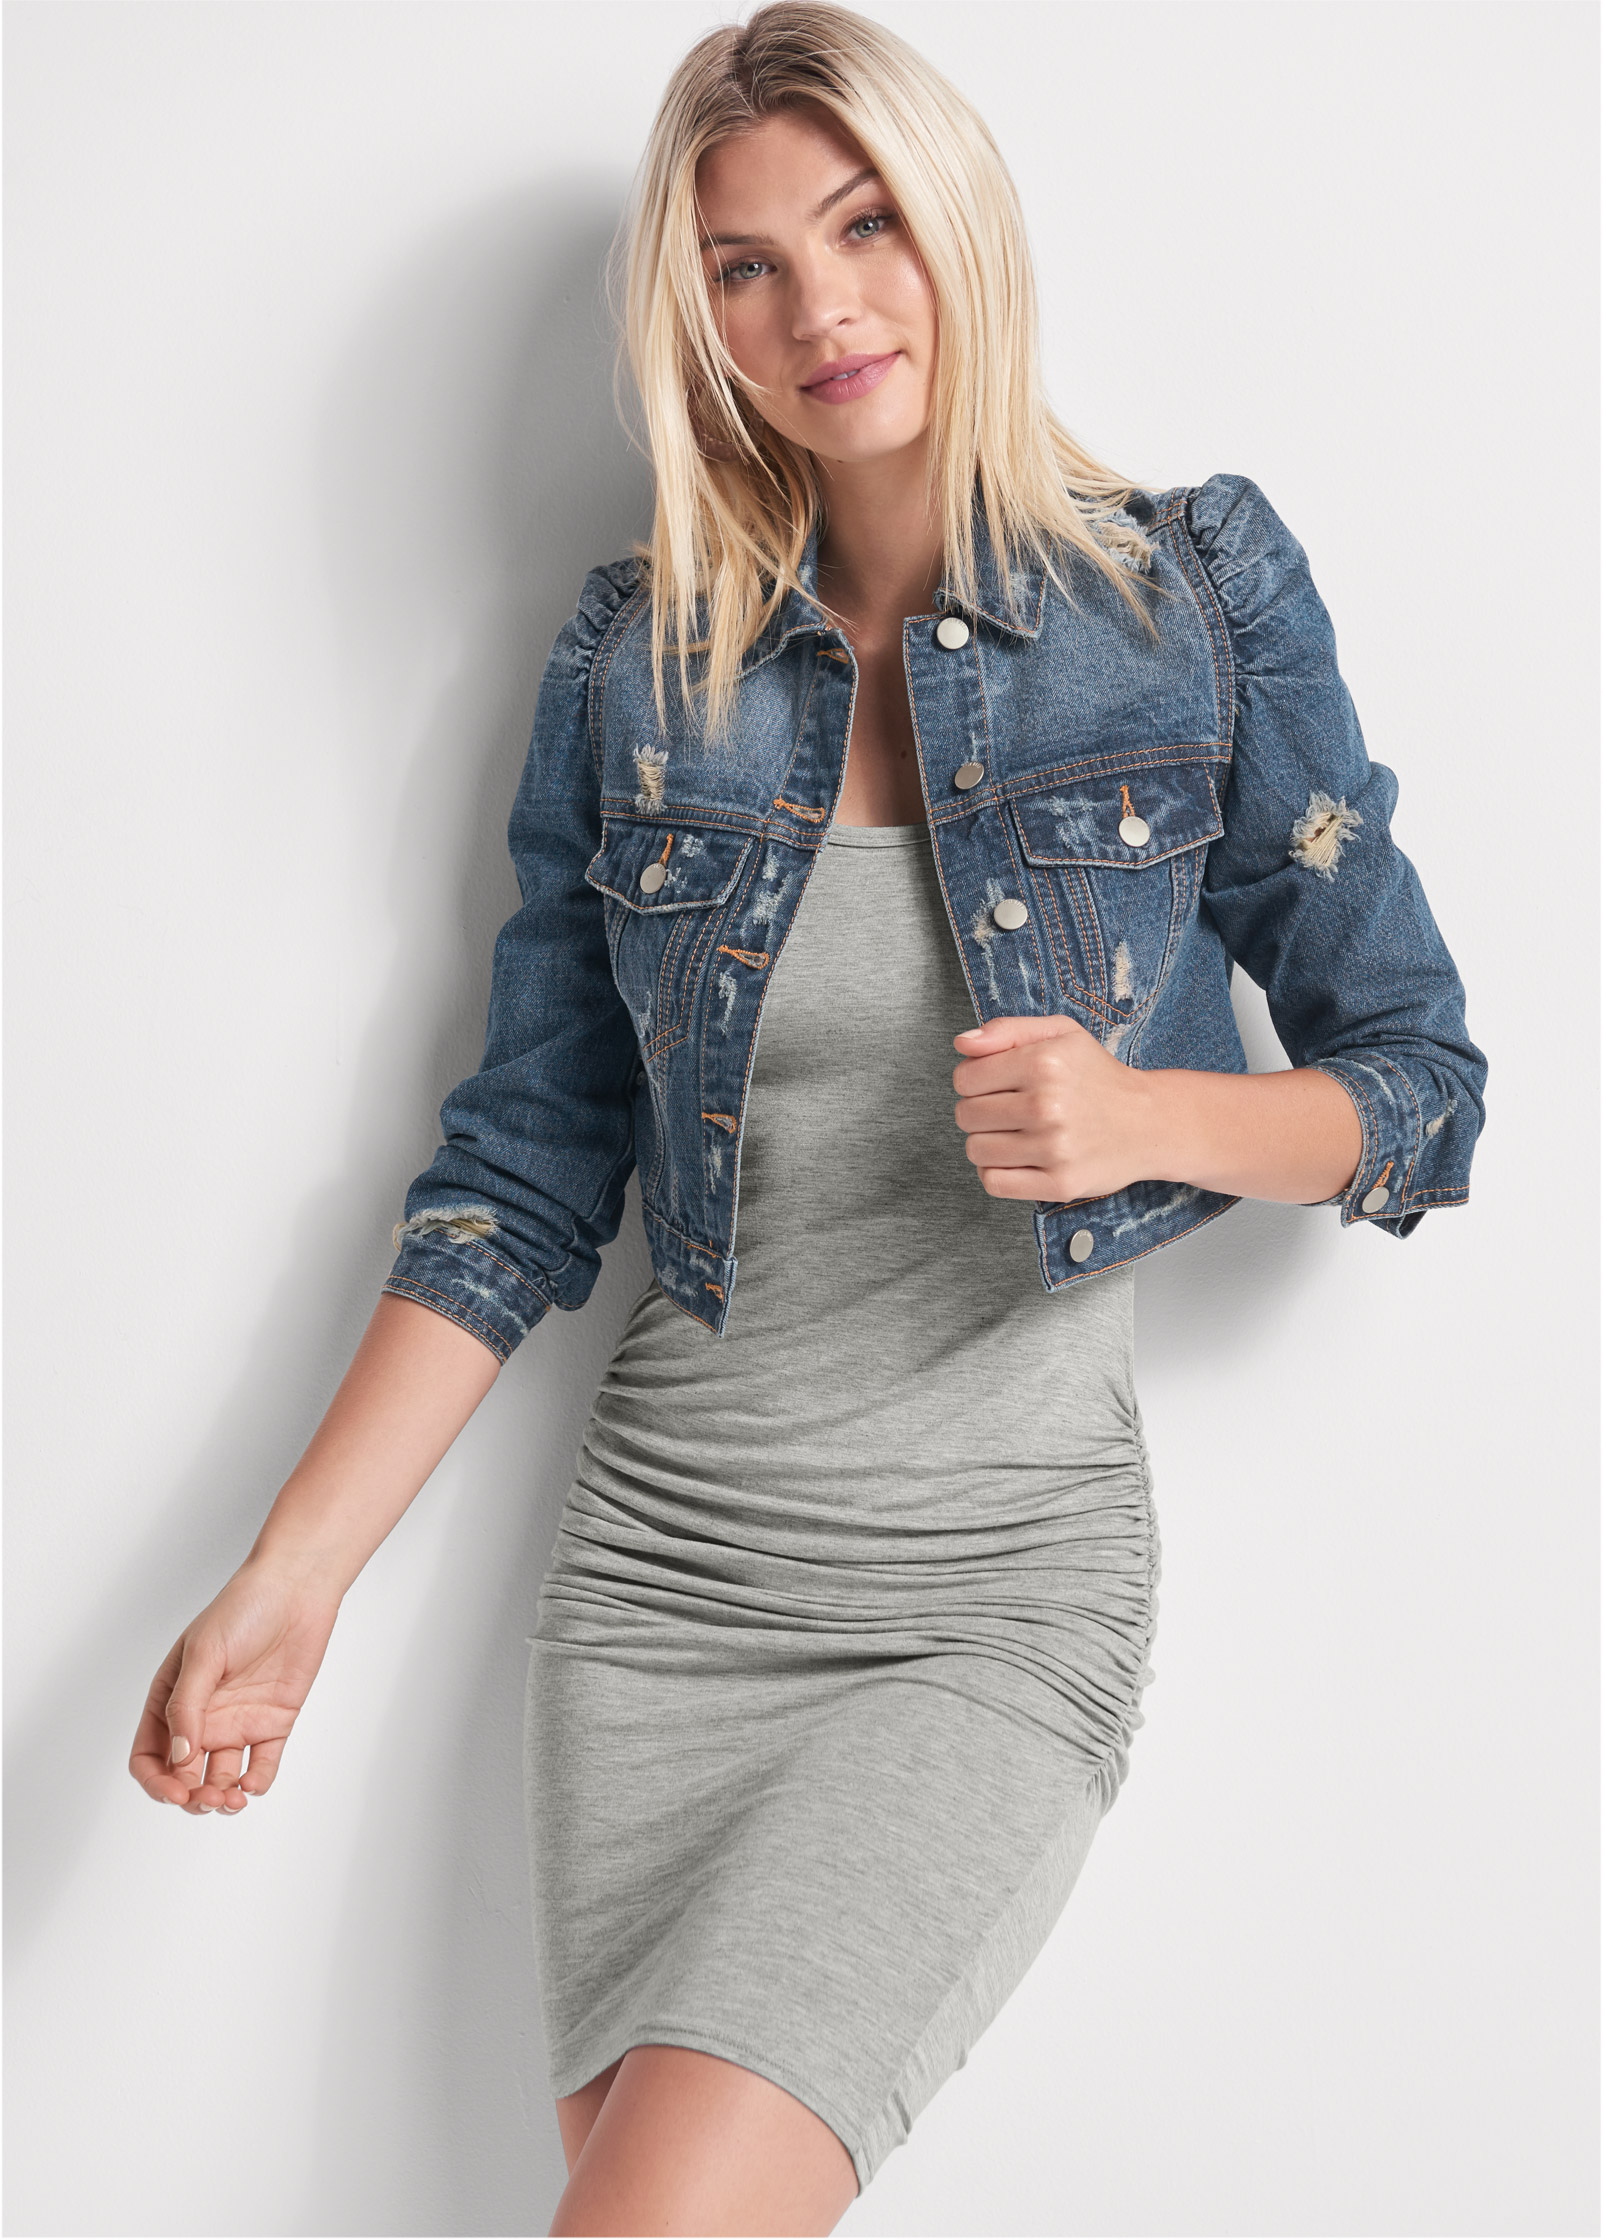 jean jacket with grey sleeves outfits